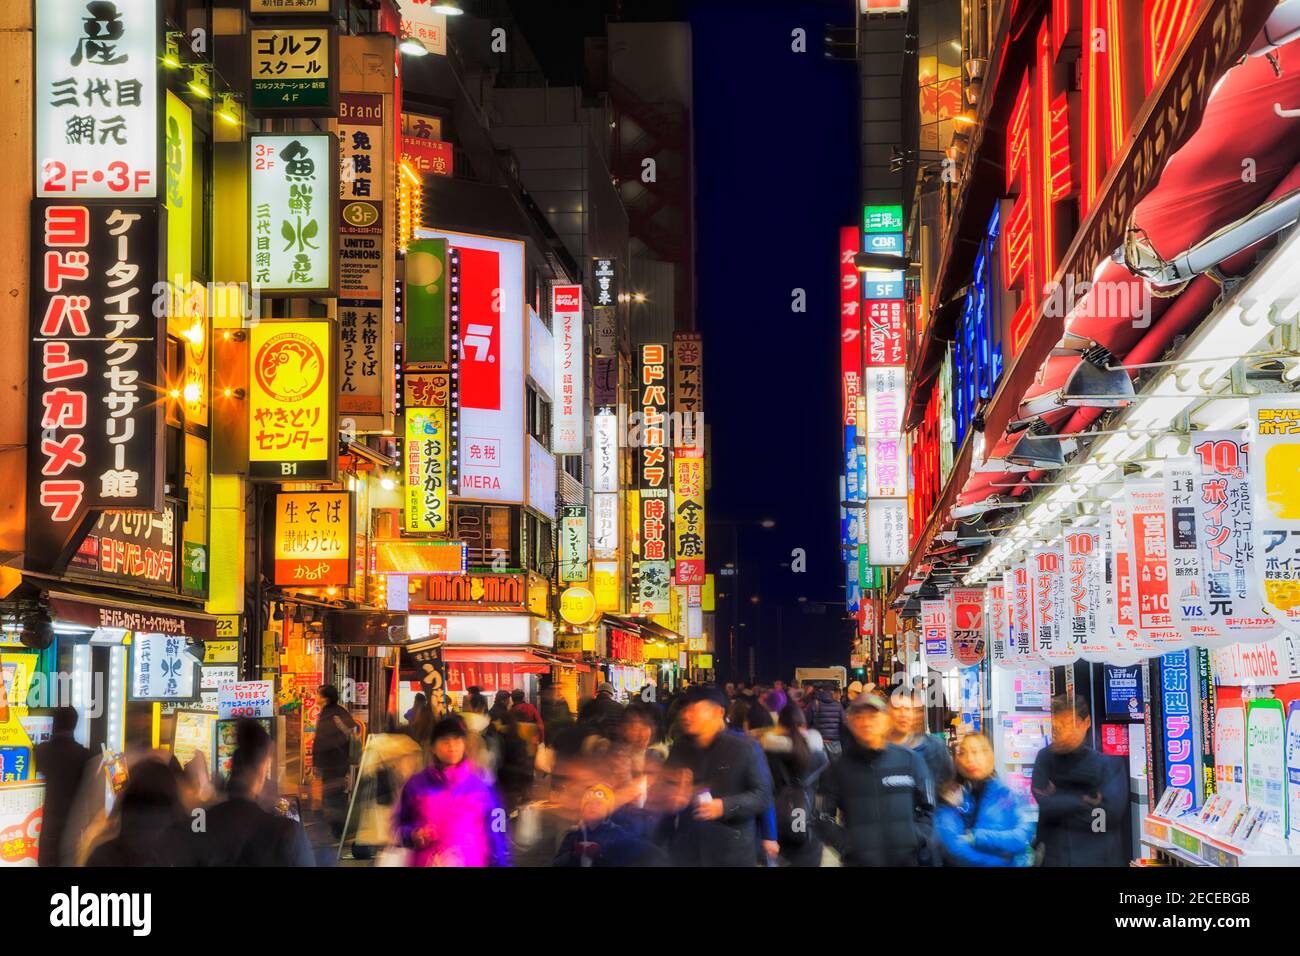 Tokyo, Japan - 2 January 2020: Famous shopping street with bright walls of flashing ads in Shinjuku district at night with bright illumination. Stock Photo